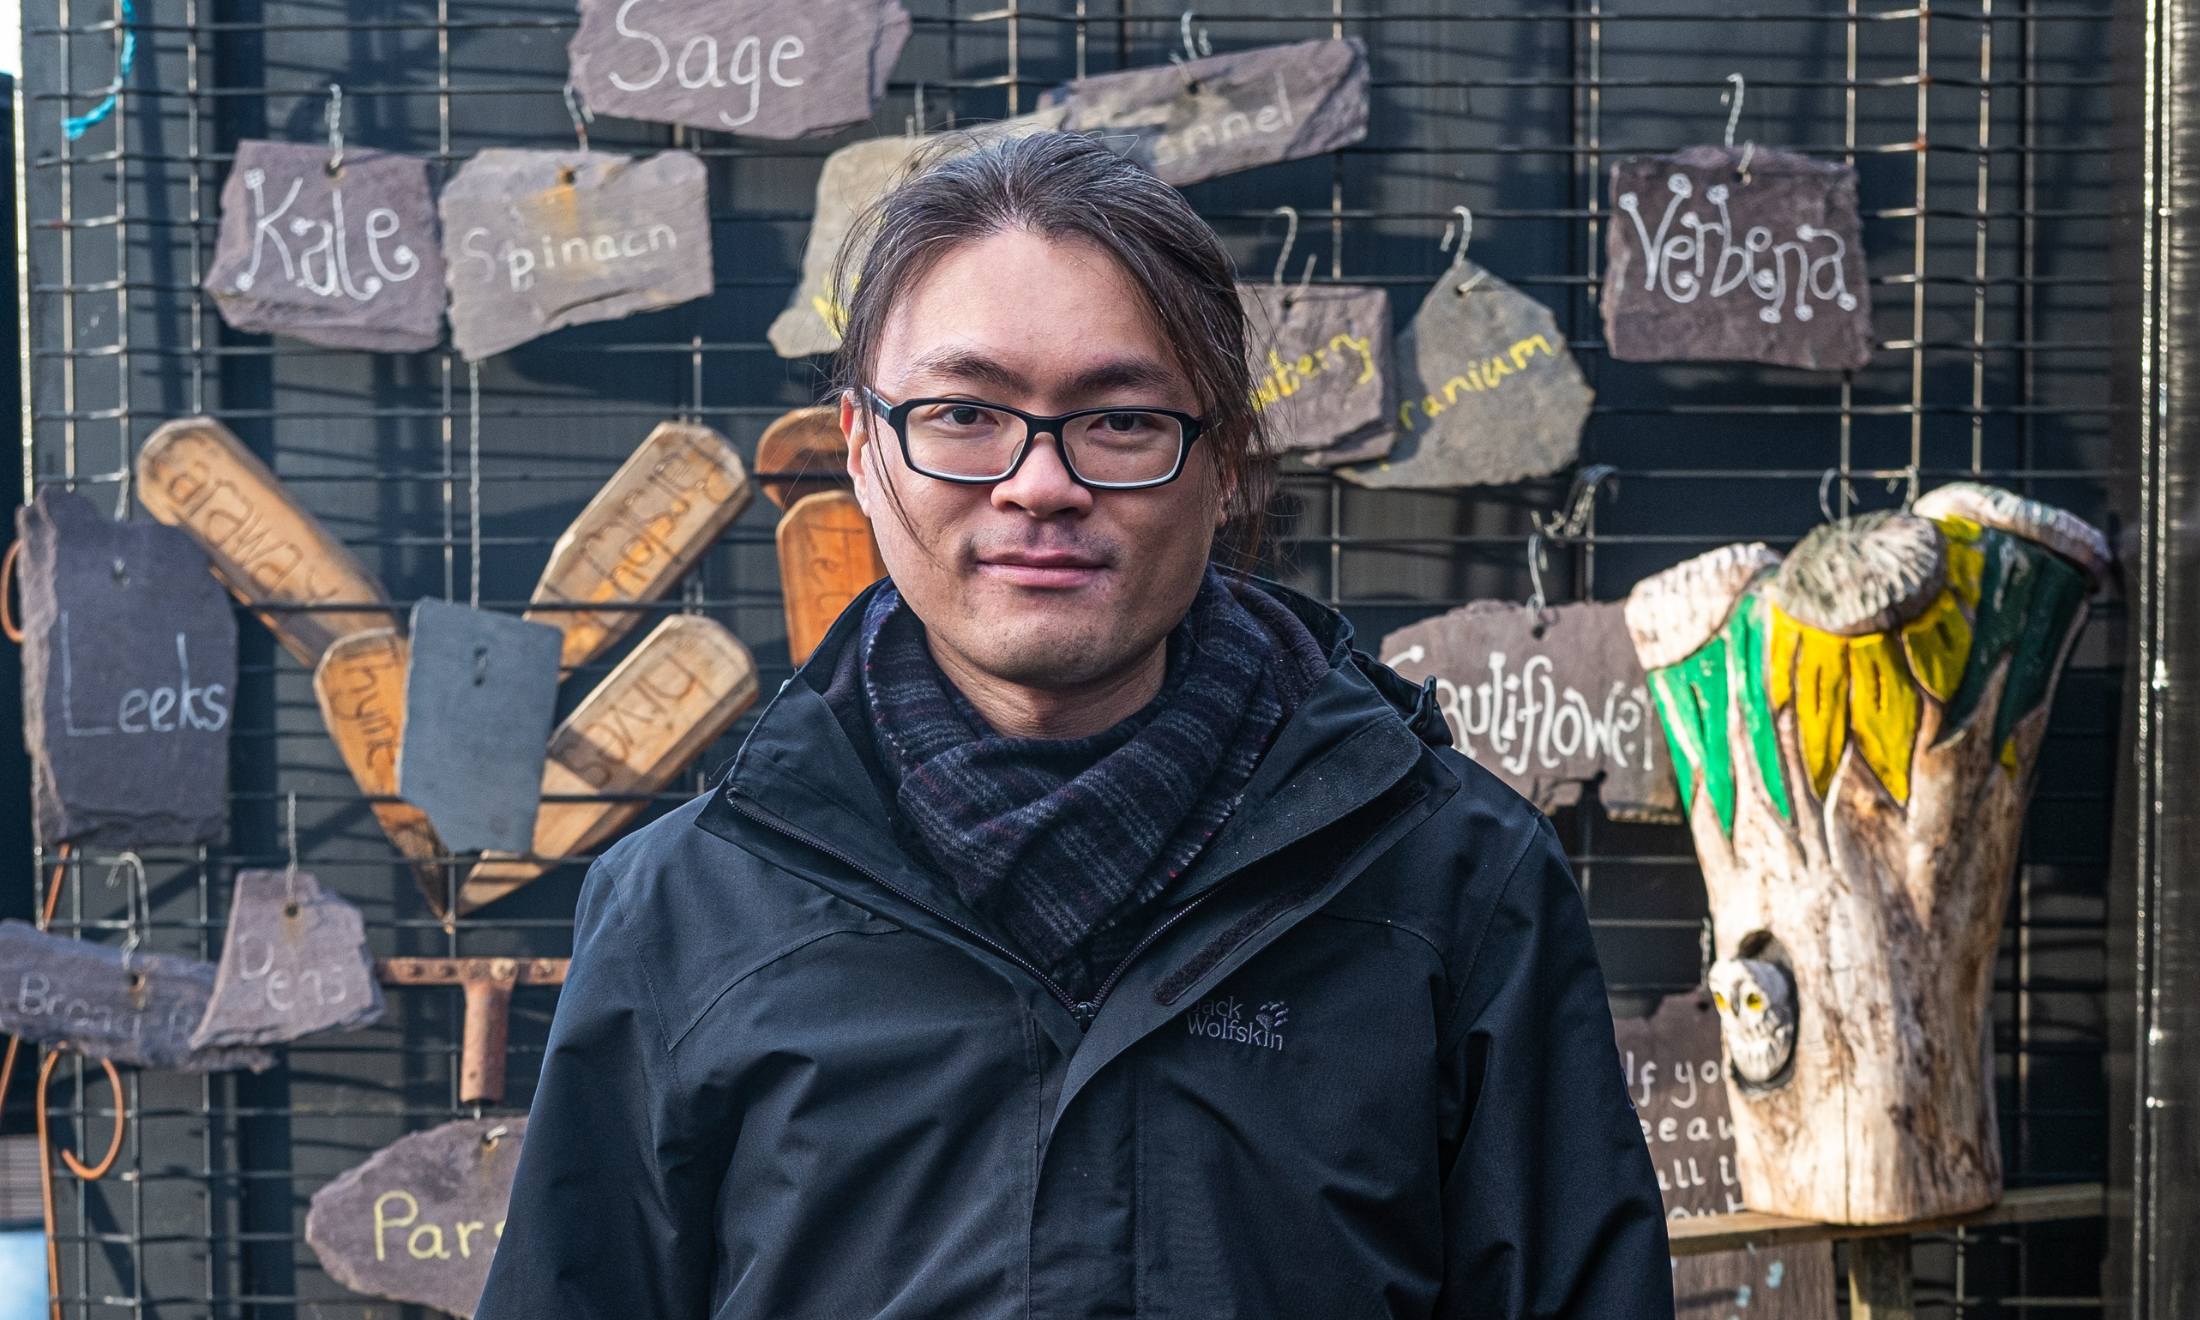 An image of person wearing a coat and looking into the camera. Behind them is a collage of stones with the words of different herbs written on them